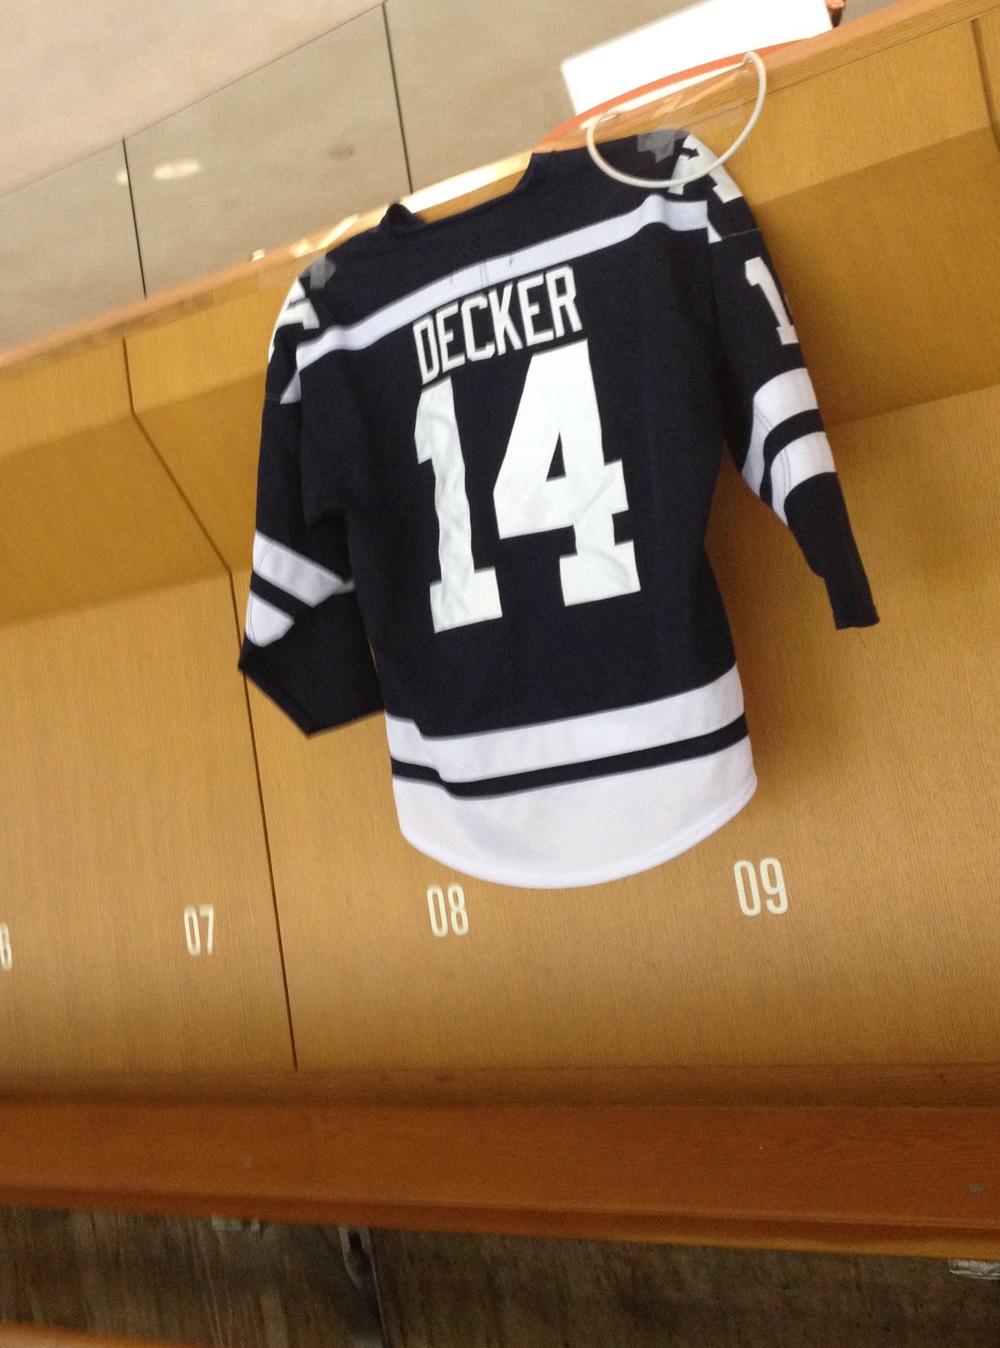 At Yale's last home game of the season, the seniors' jerseys are displayed at Ingalls rink. &nbsp;I wasn't healthy enough to play, but I got to put on my gear and jersey one last time.